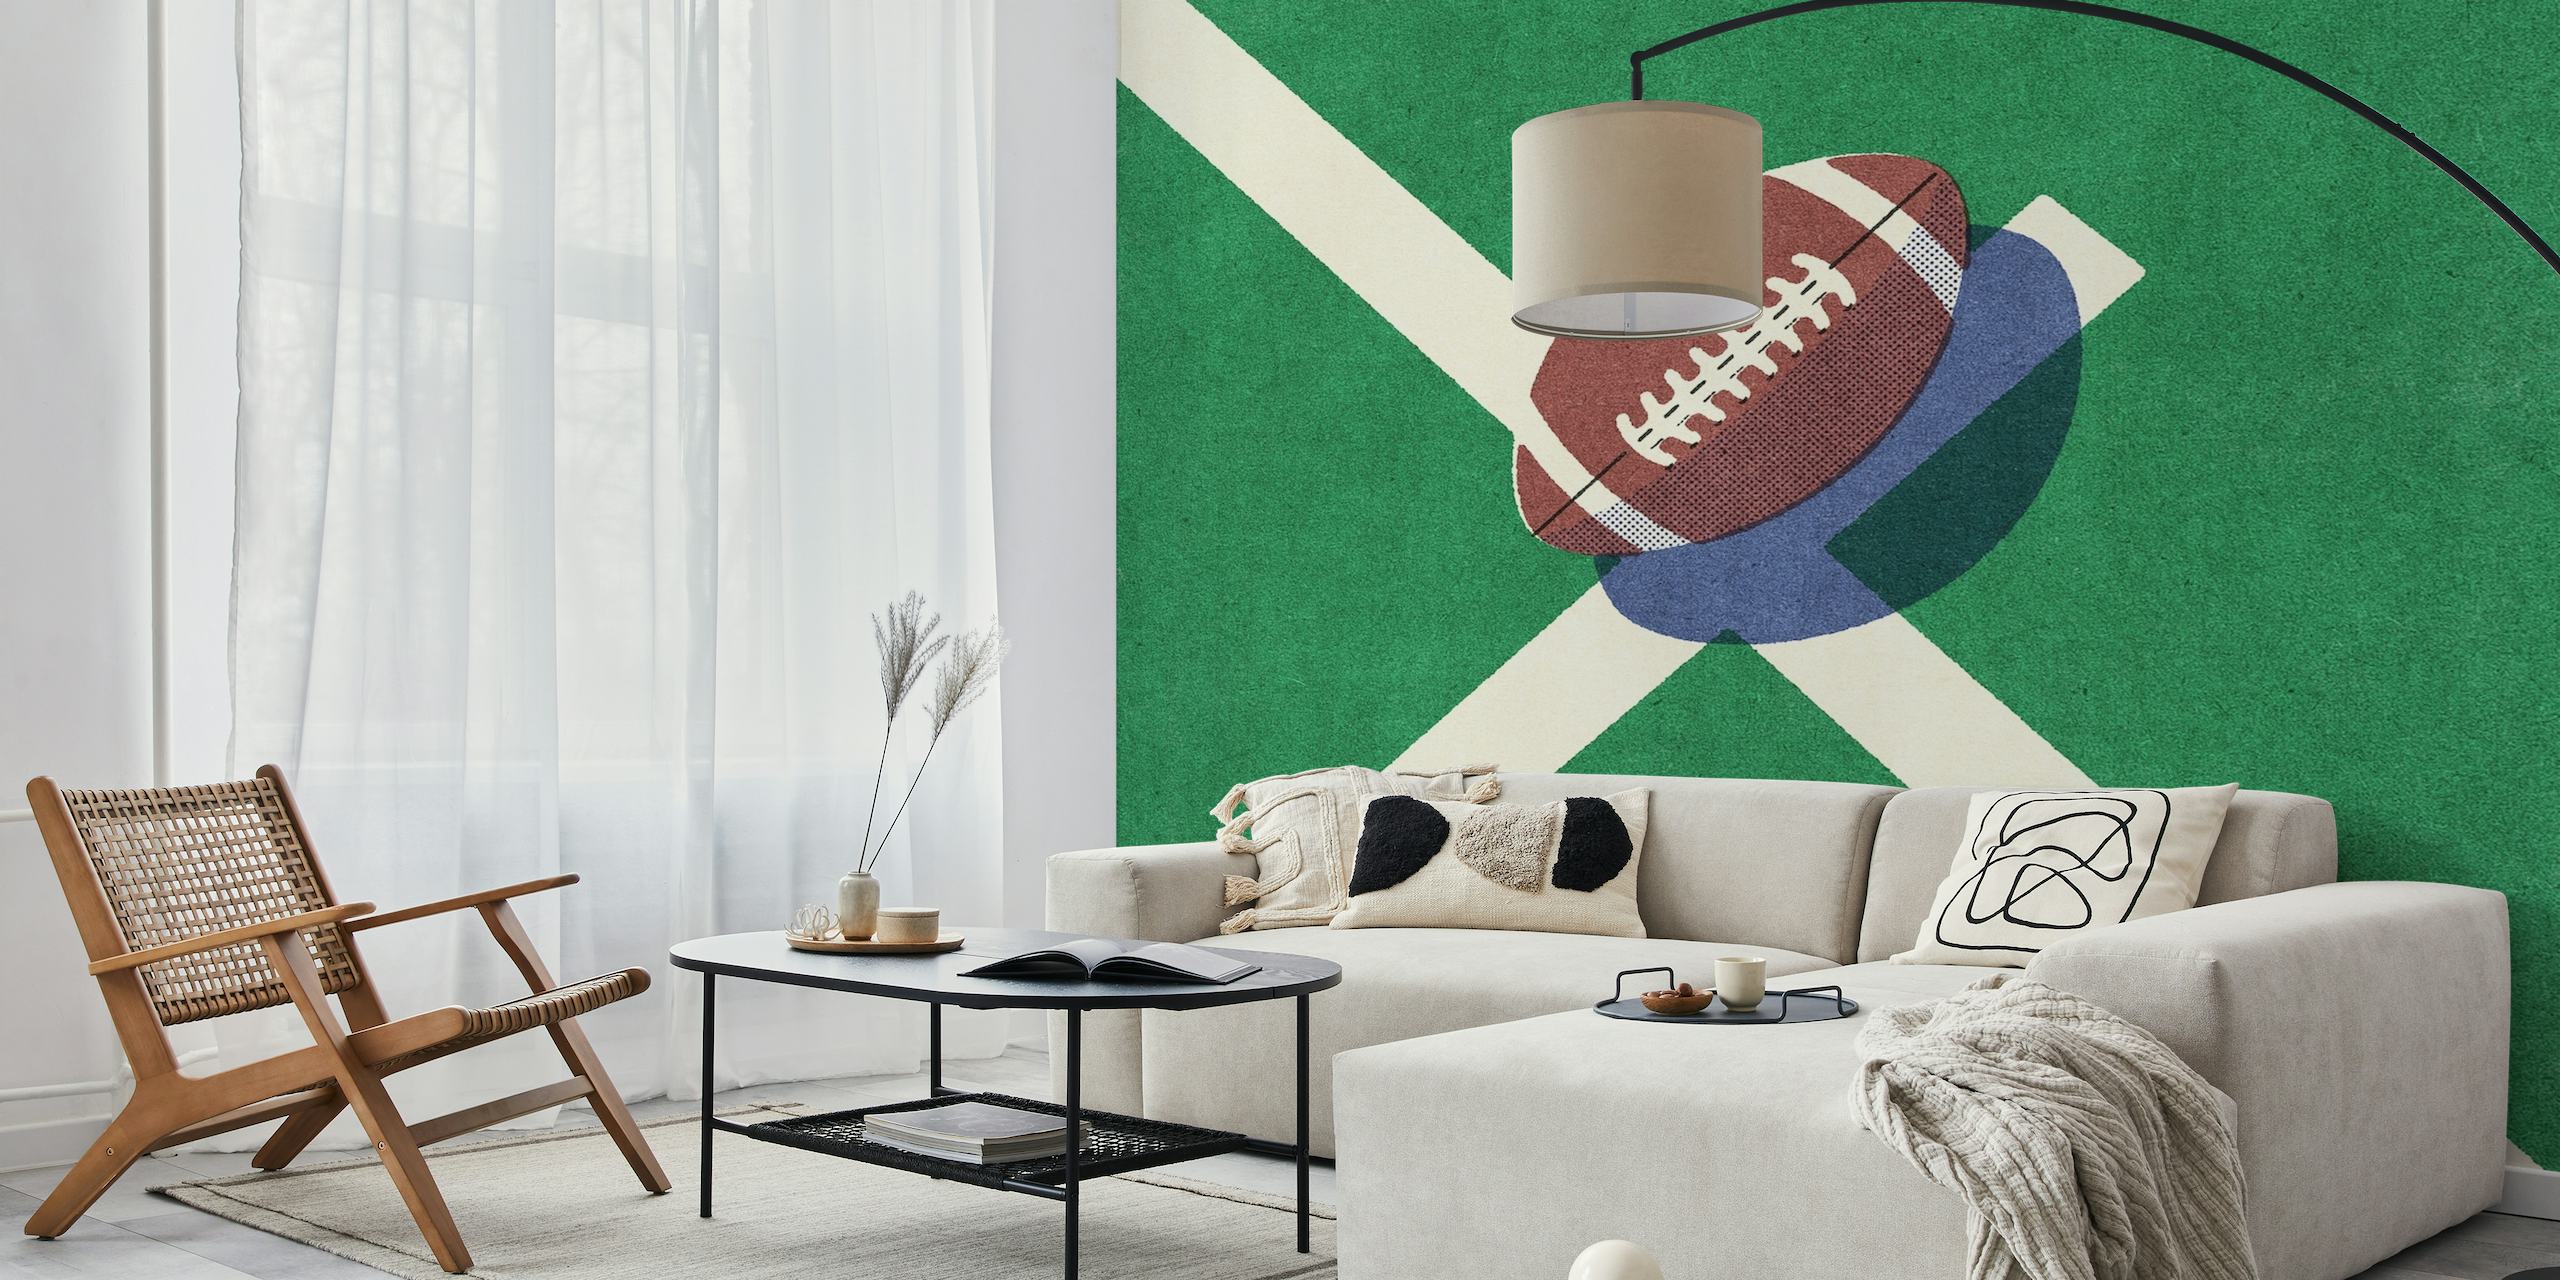 Vintage-style American football wall mural with a pigskin ball on a green field